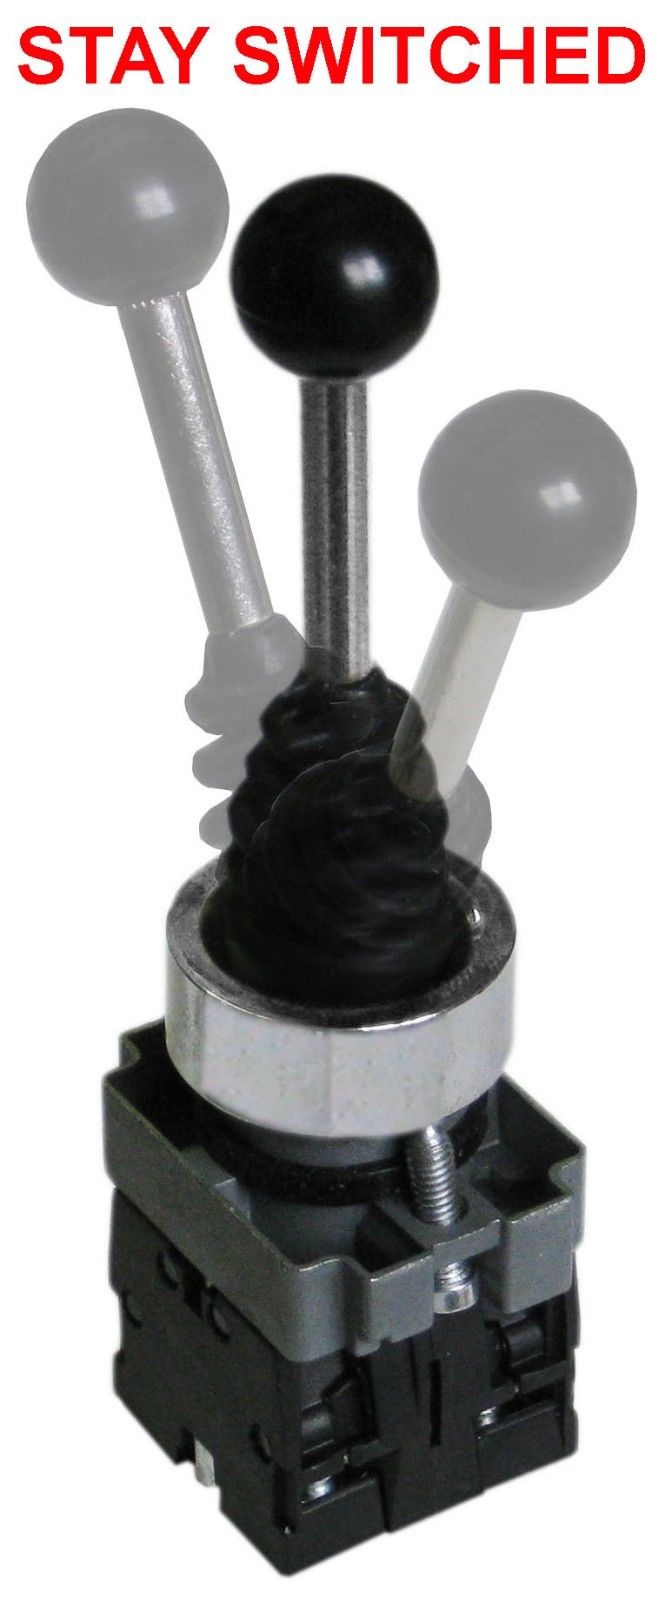 2 Position Joystick Switch Maintained or Momentary-ACECREW – AceCrew